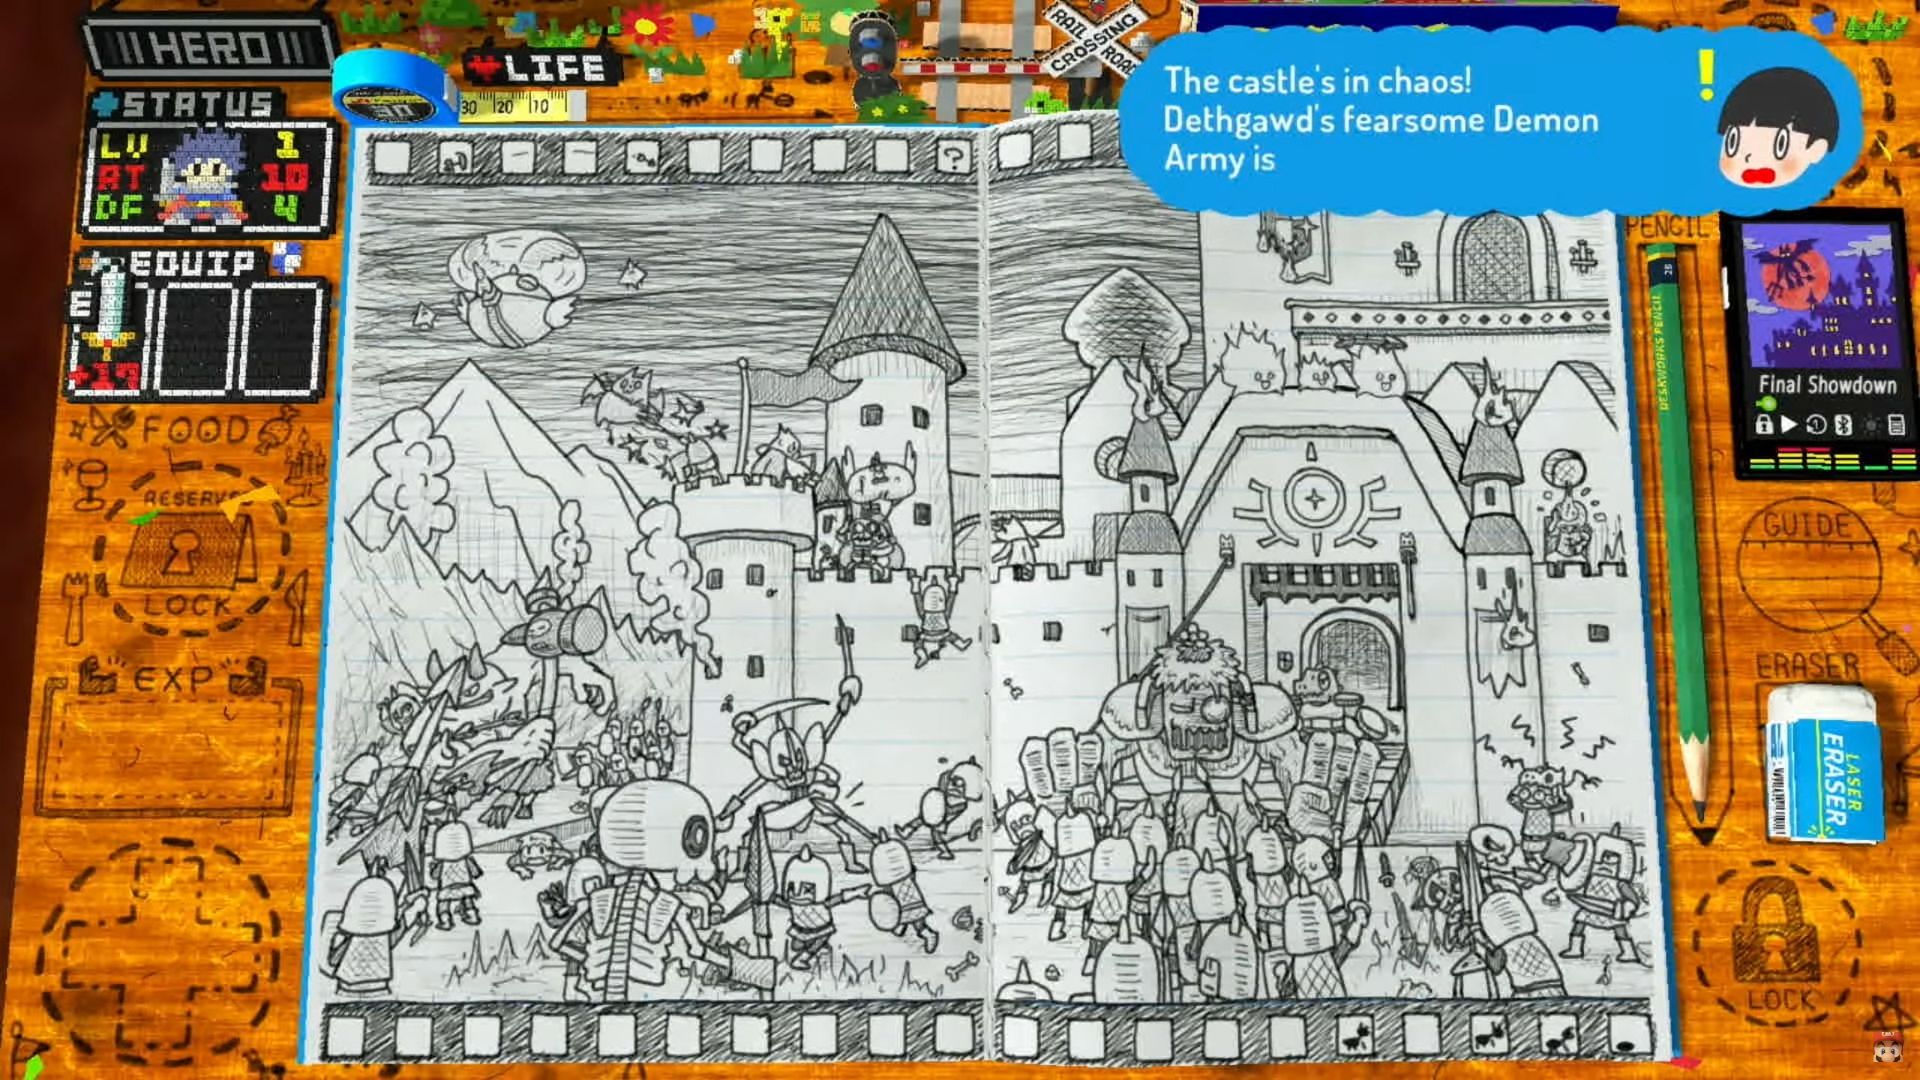 An adorable hand-drawn notebook scene in RPG Time: The Legend of Wright in today's Nintendo Direct Mini